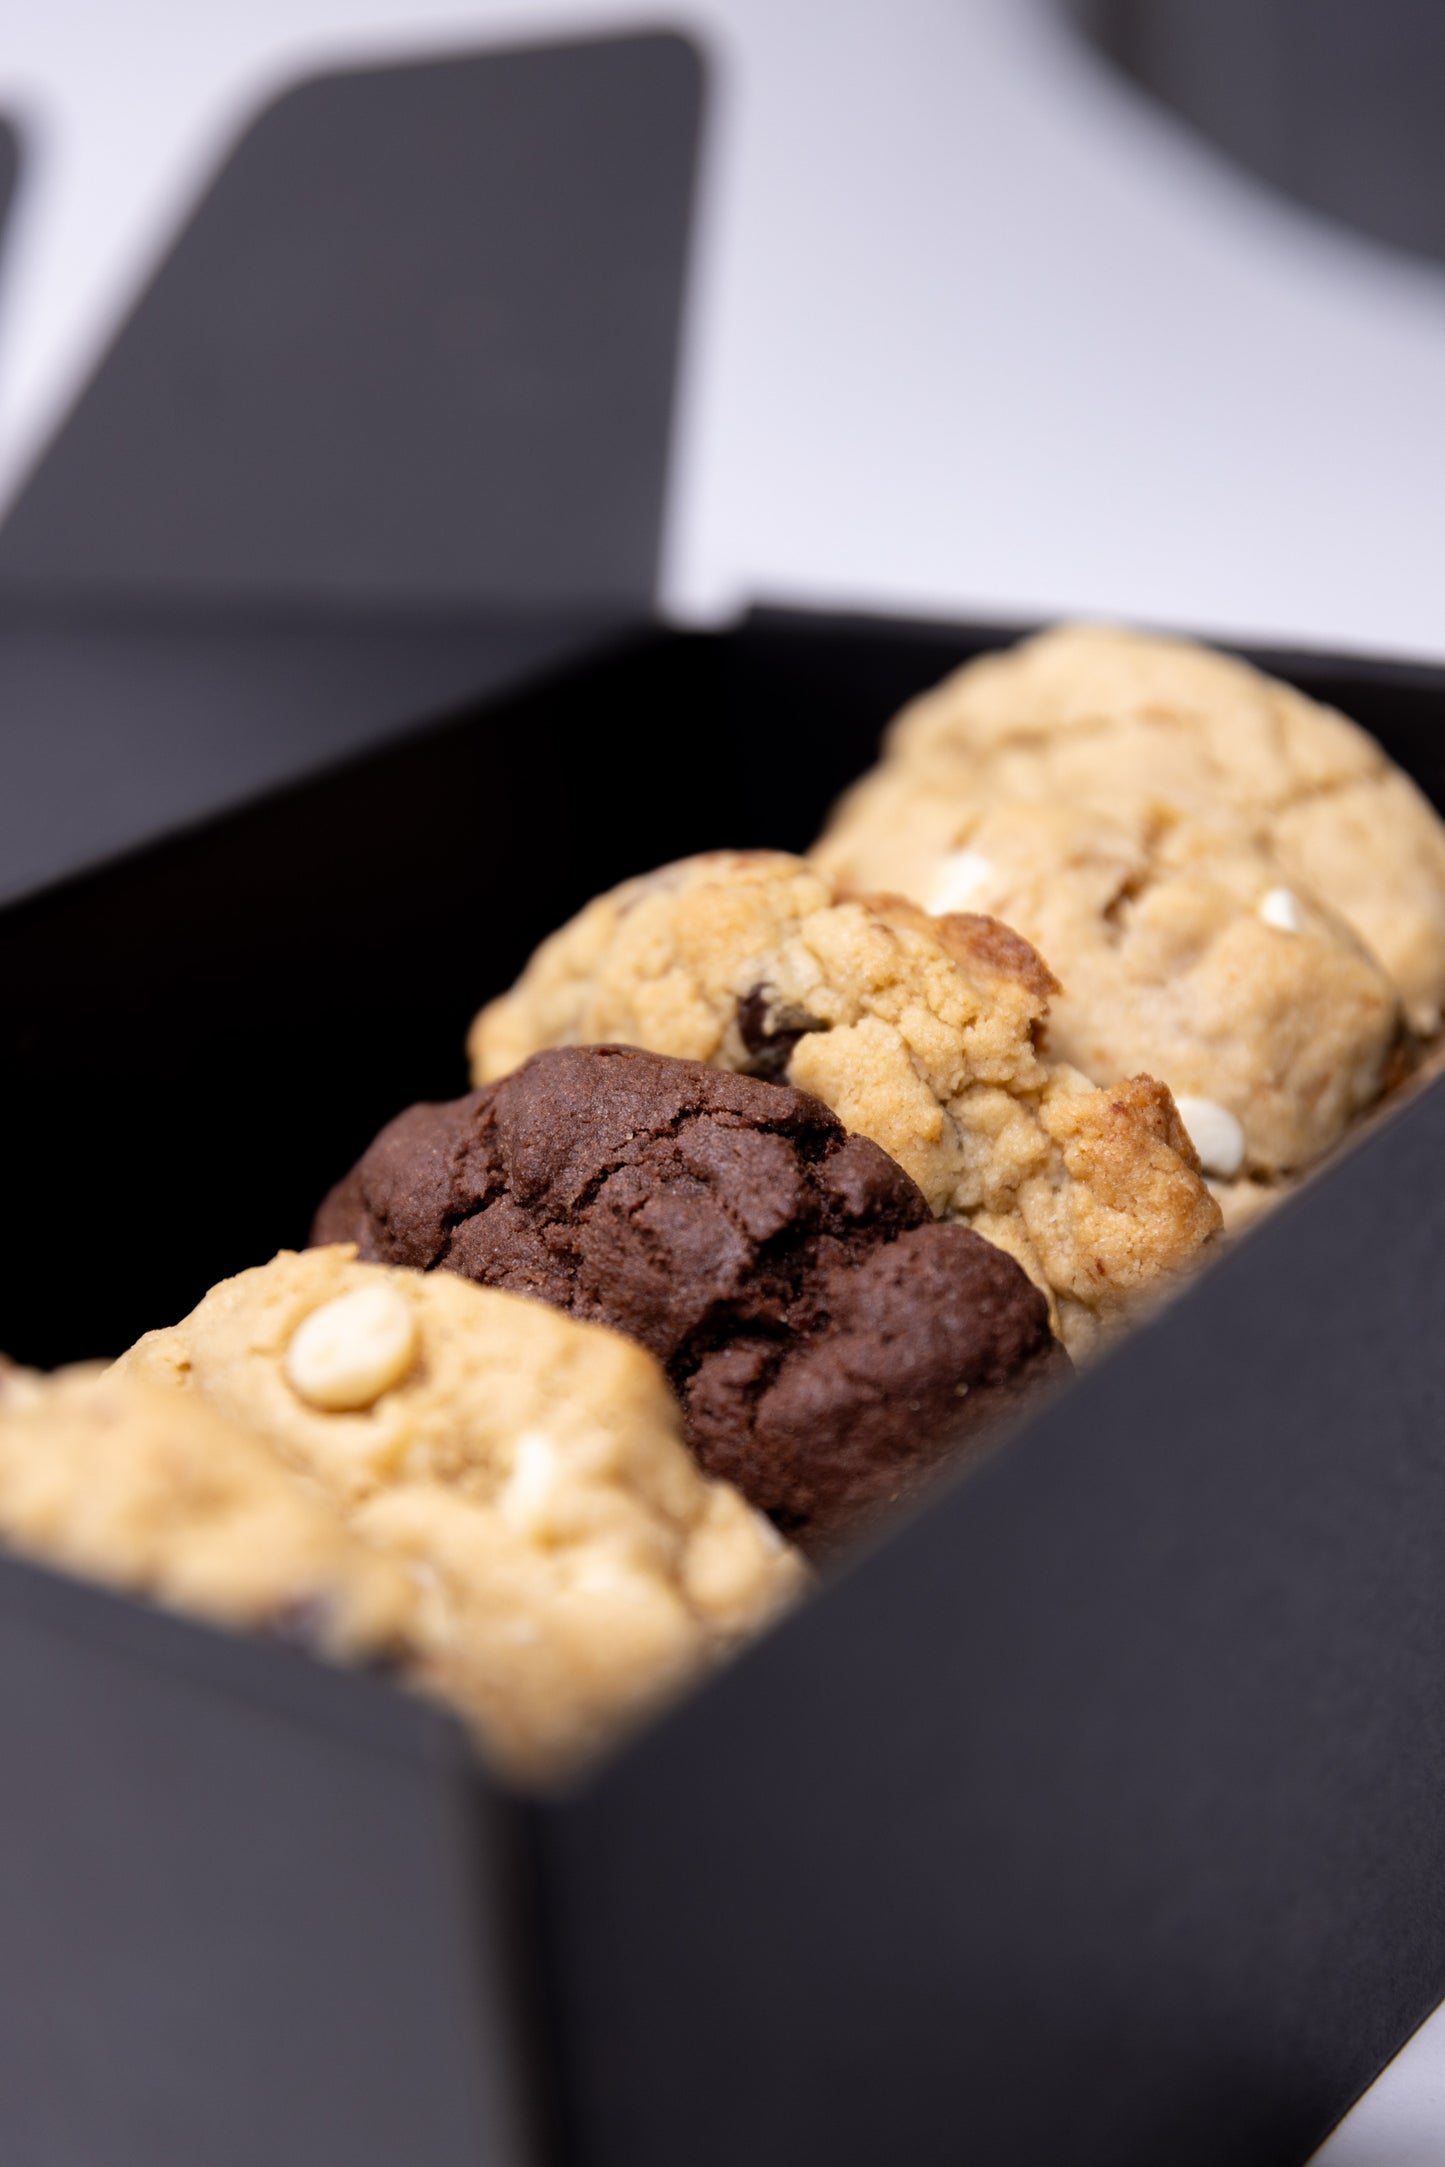 Monthly Chunky Cookie Subscription